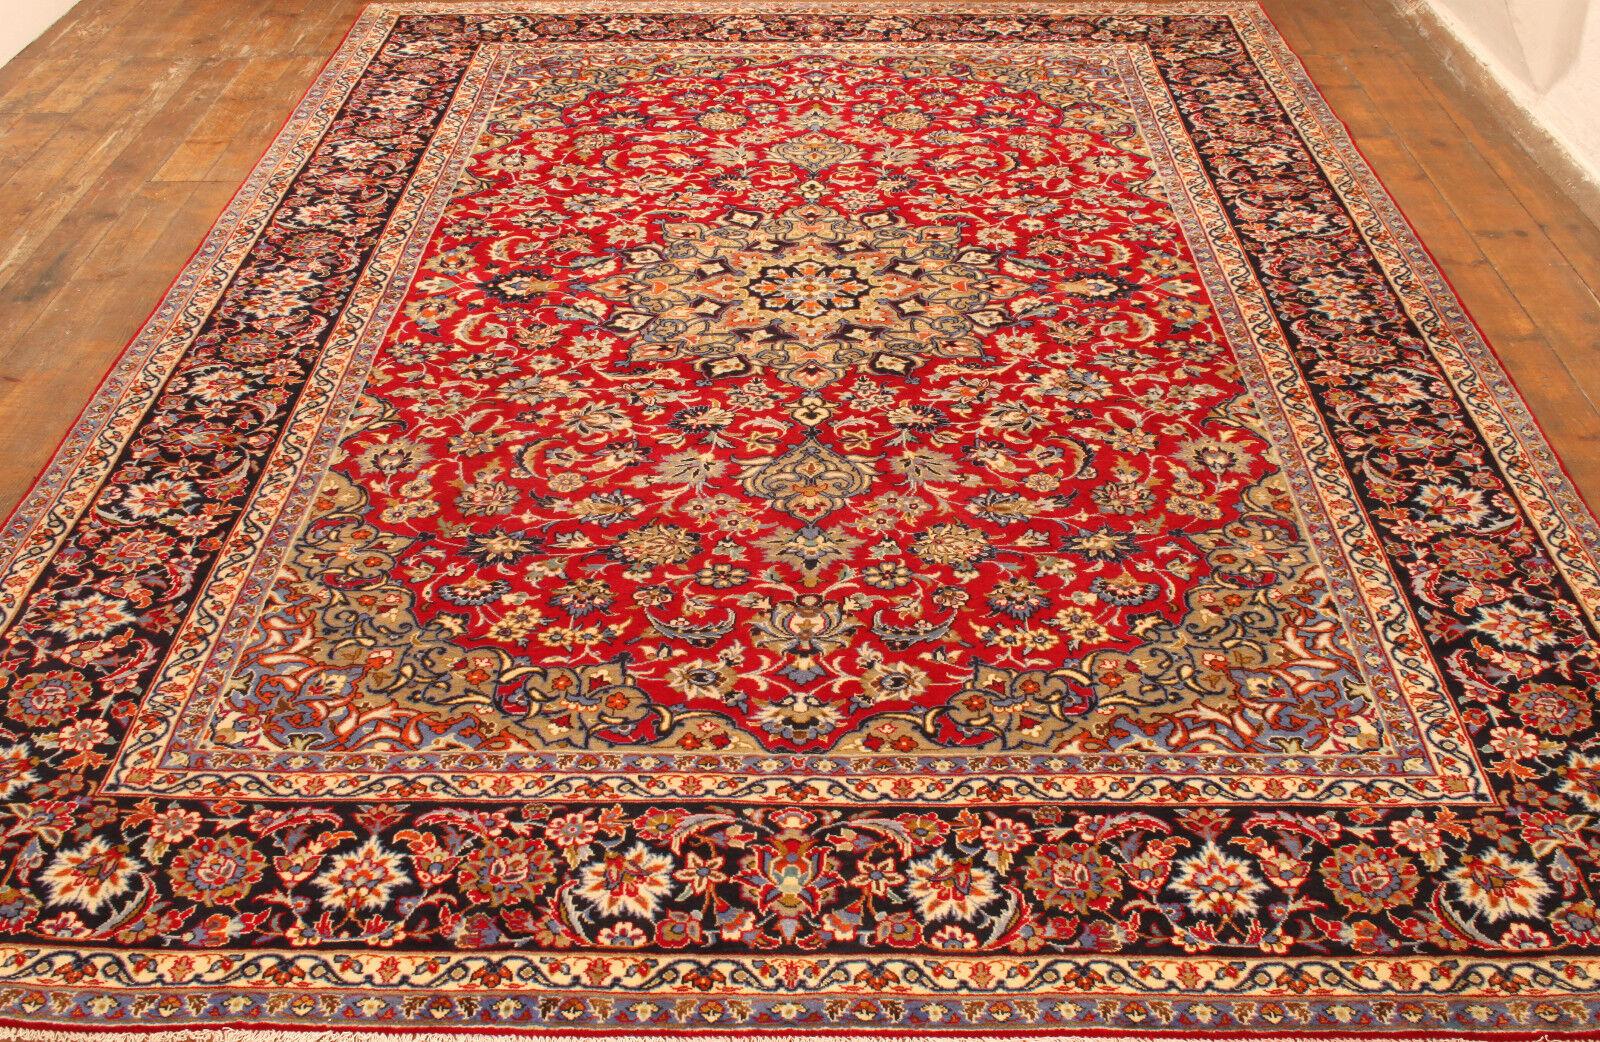 Elevate your space with classic grandeur using our Handmade Vintage Persian Style Kashan Rug, a majestic creation from the 1960s. Measuring at an impressive 9.6' x 14.1', this rug showcases a timeless medallion design in rich red and blue shades,